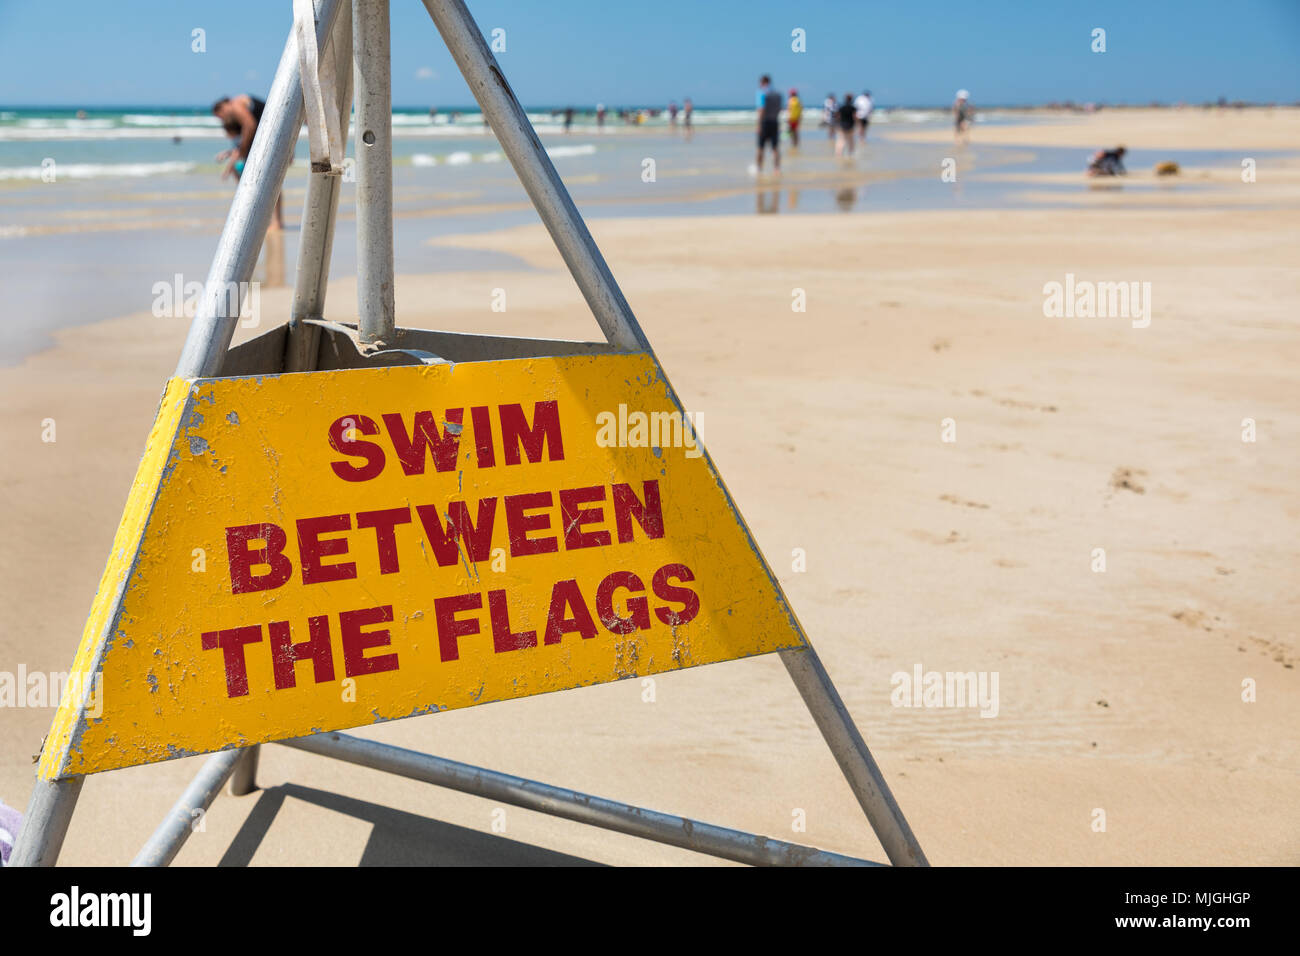 Swim between the flags - a common surf lifesaving sign on beaches in Australia promoting swimming safety Stock Photo